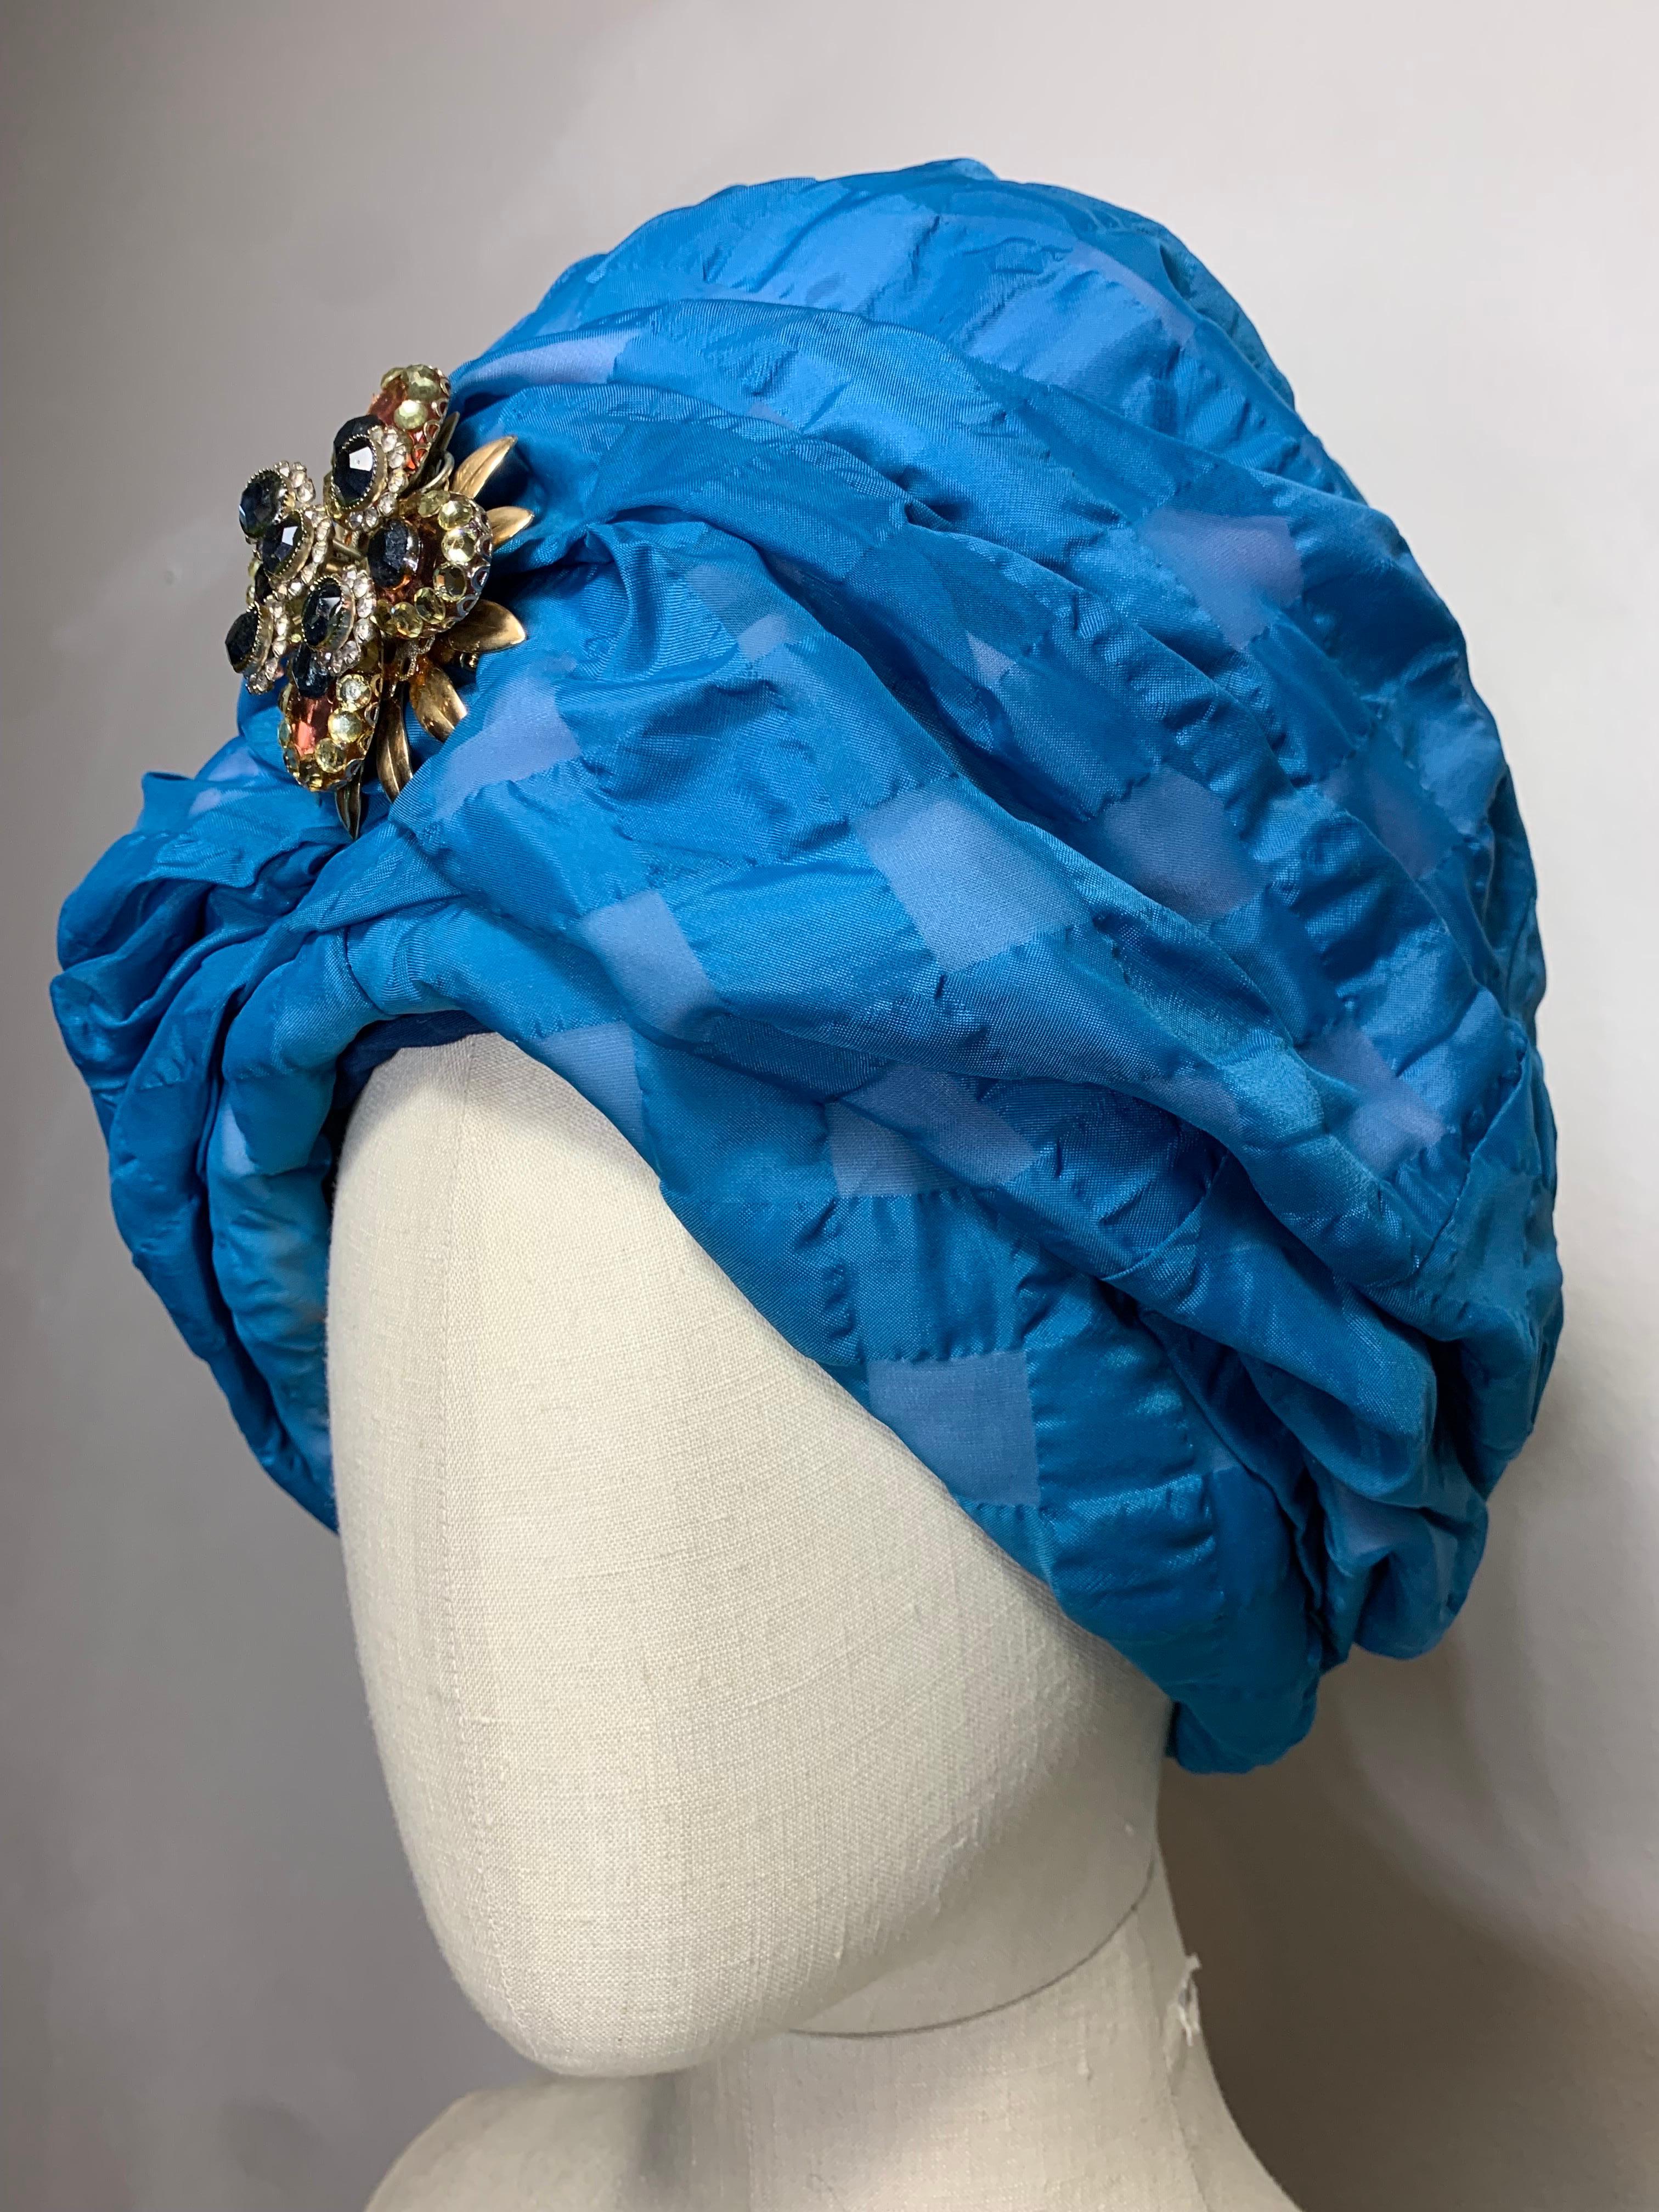 Custom Made Spring/Summer Azure Blue Seersucker Check Padded Turban w Coordinating Jeweled Brooch:  A gorgeous shade of blue with a stunning silhouette.  US size 7 1/2.  

Please visit our 1Dibs Store for many more options from this same collection